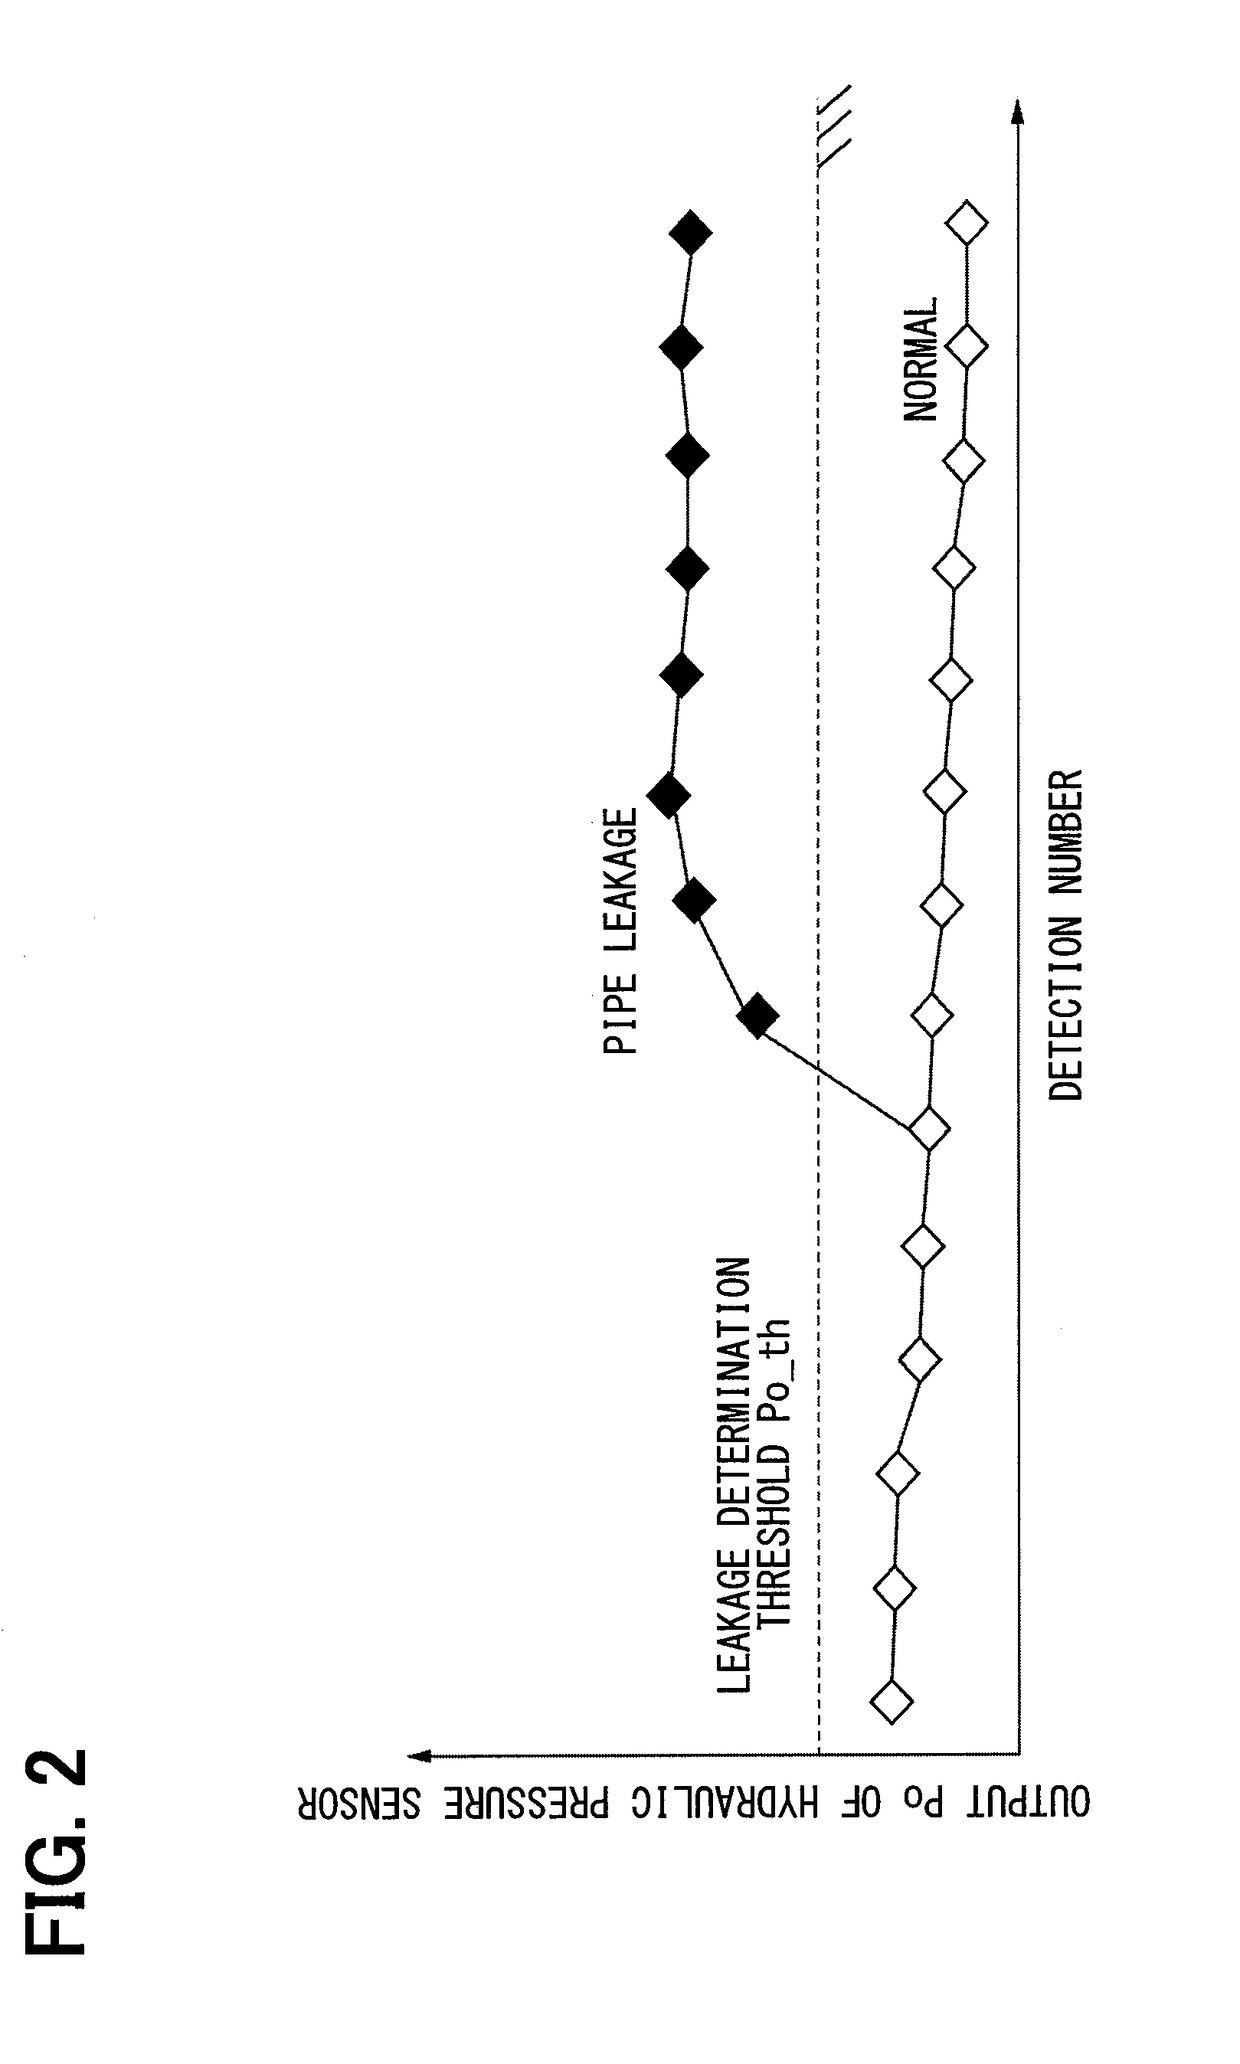 Fault detection device for internal combustion engine